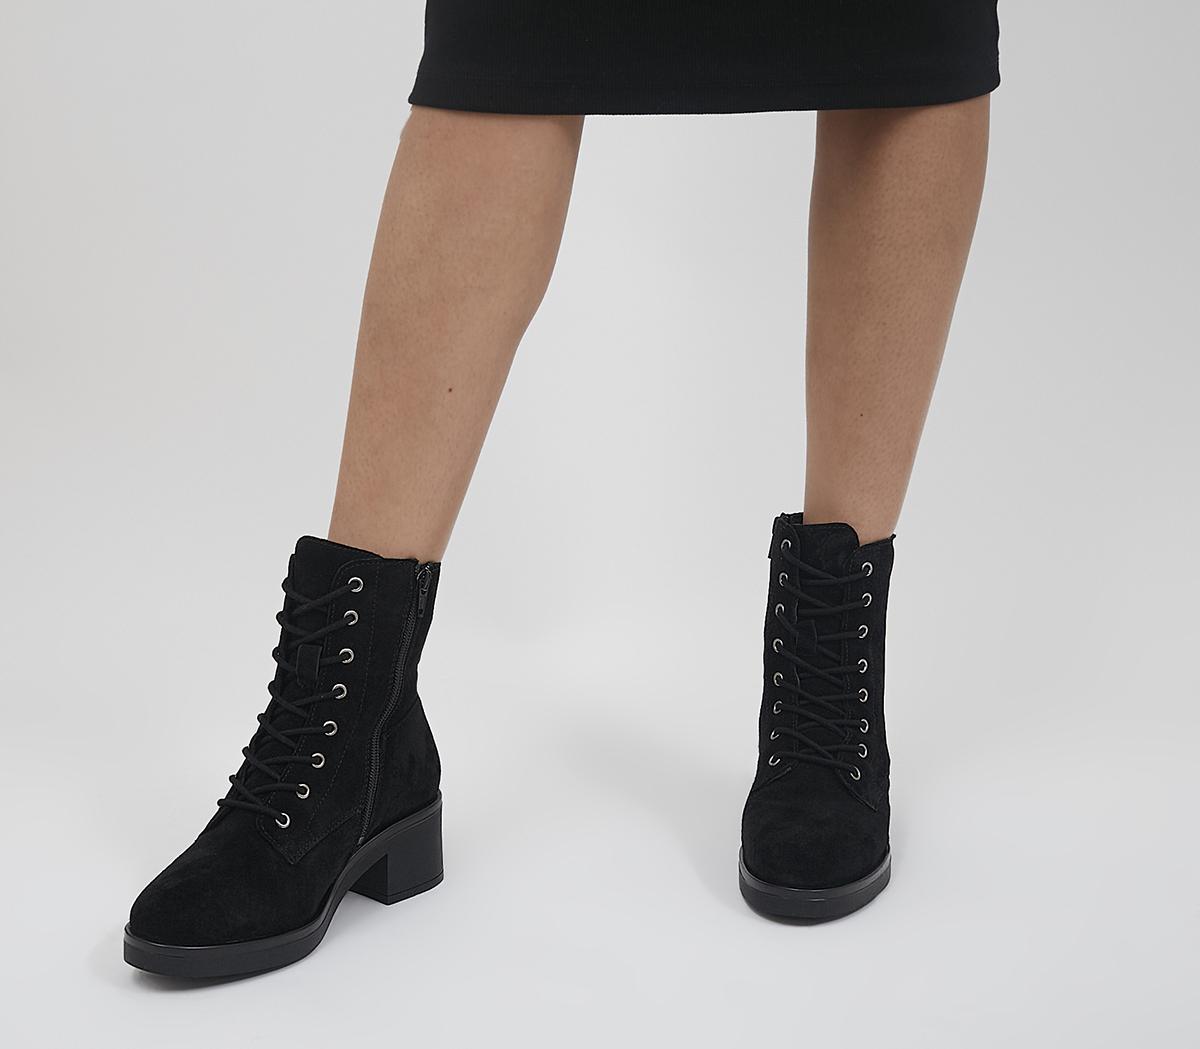 OFFICE Adina Block Heel Lace Up Boots Black Suede - Women's Boots